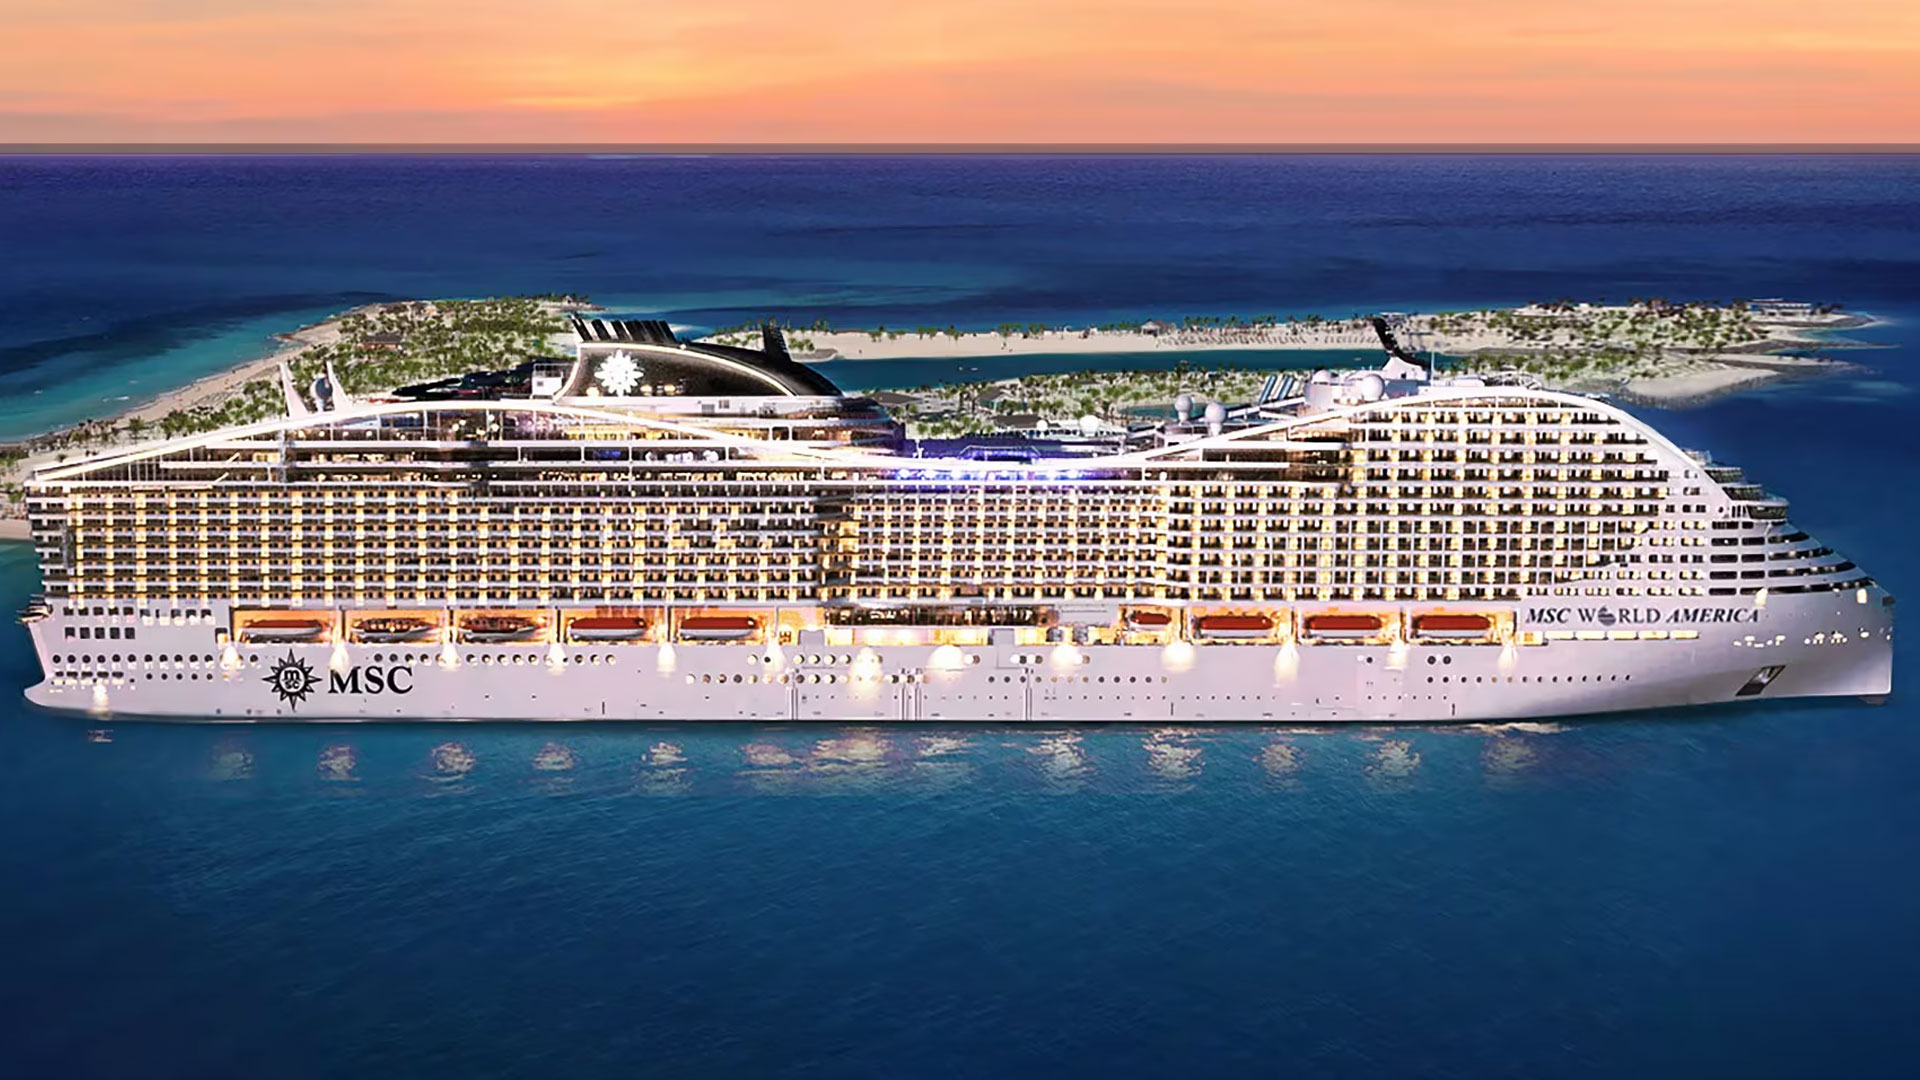 Experience the Ultimate Adventure Aboard the New US Cruise Ship with Waterpark, Bumper Cars, and 20 Bars Onboard!